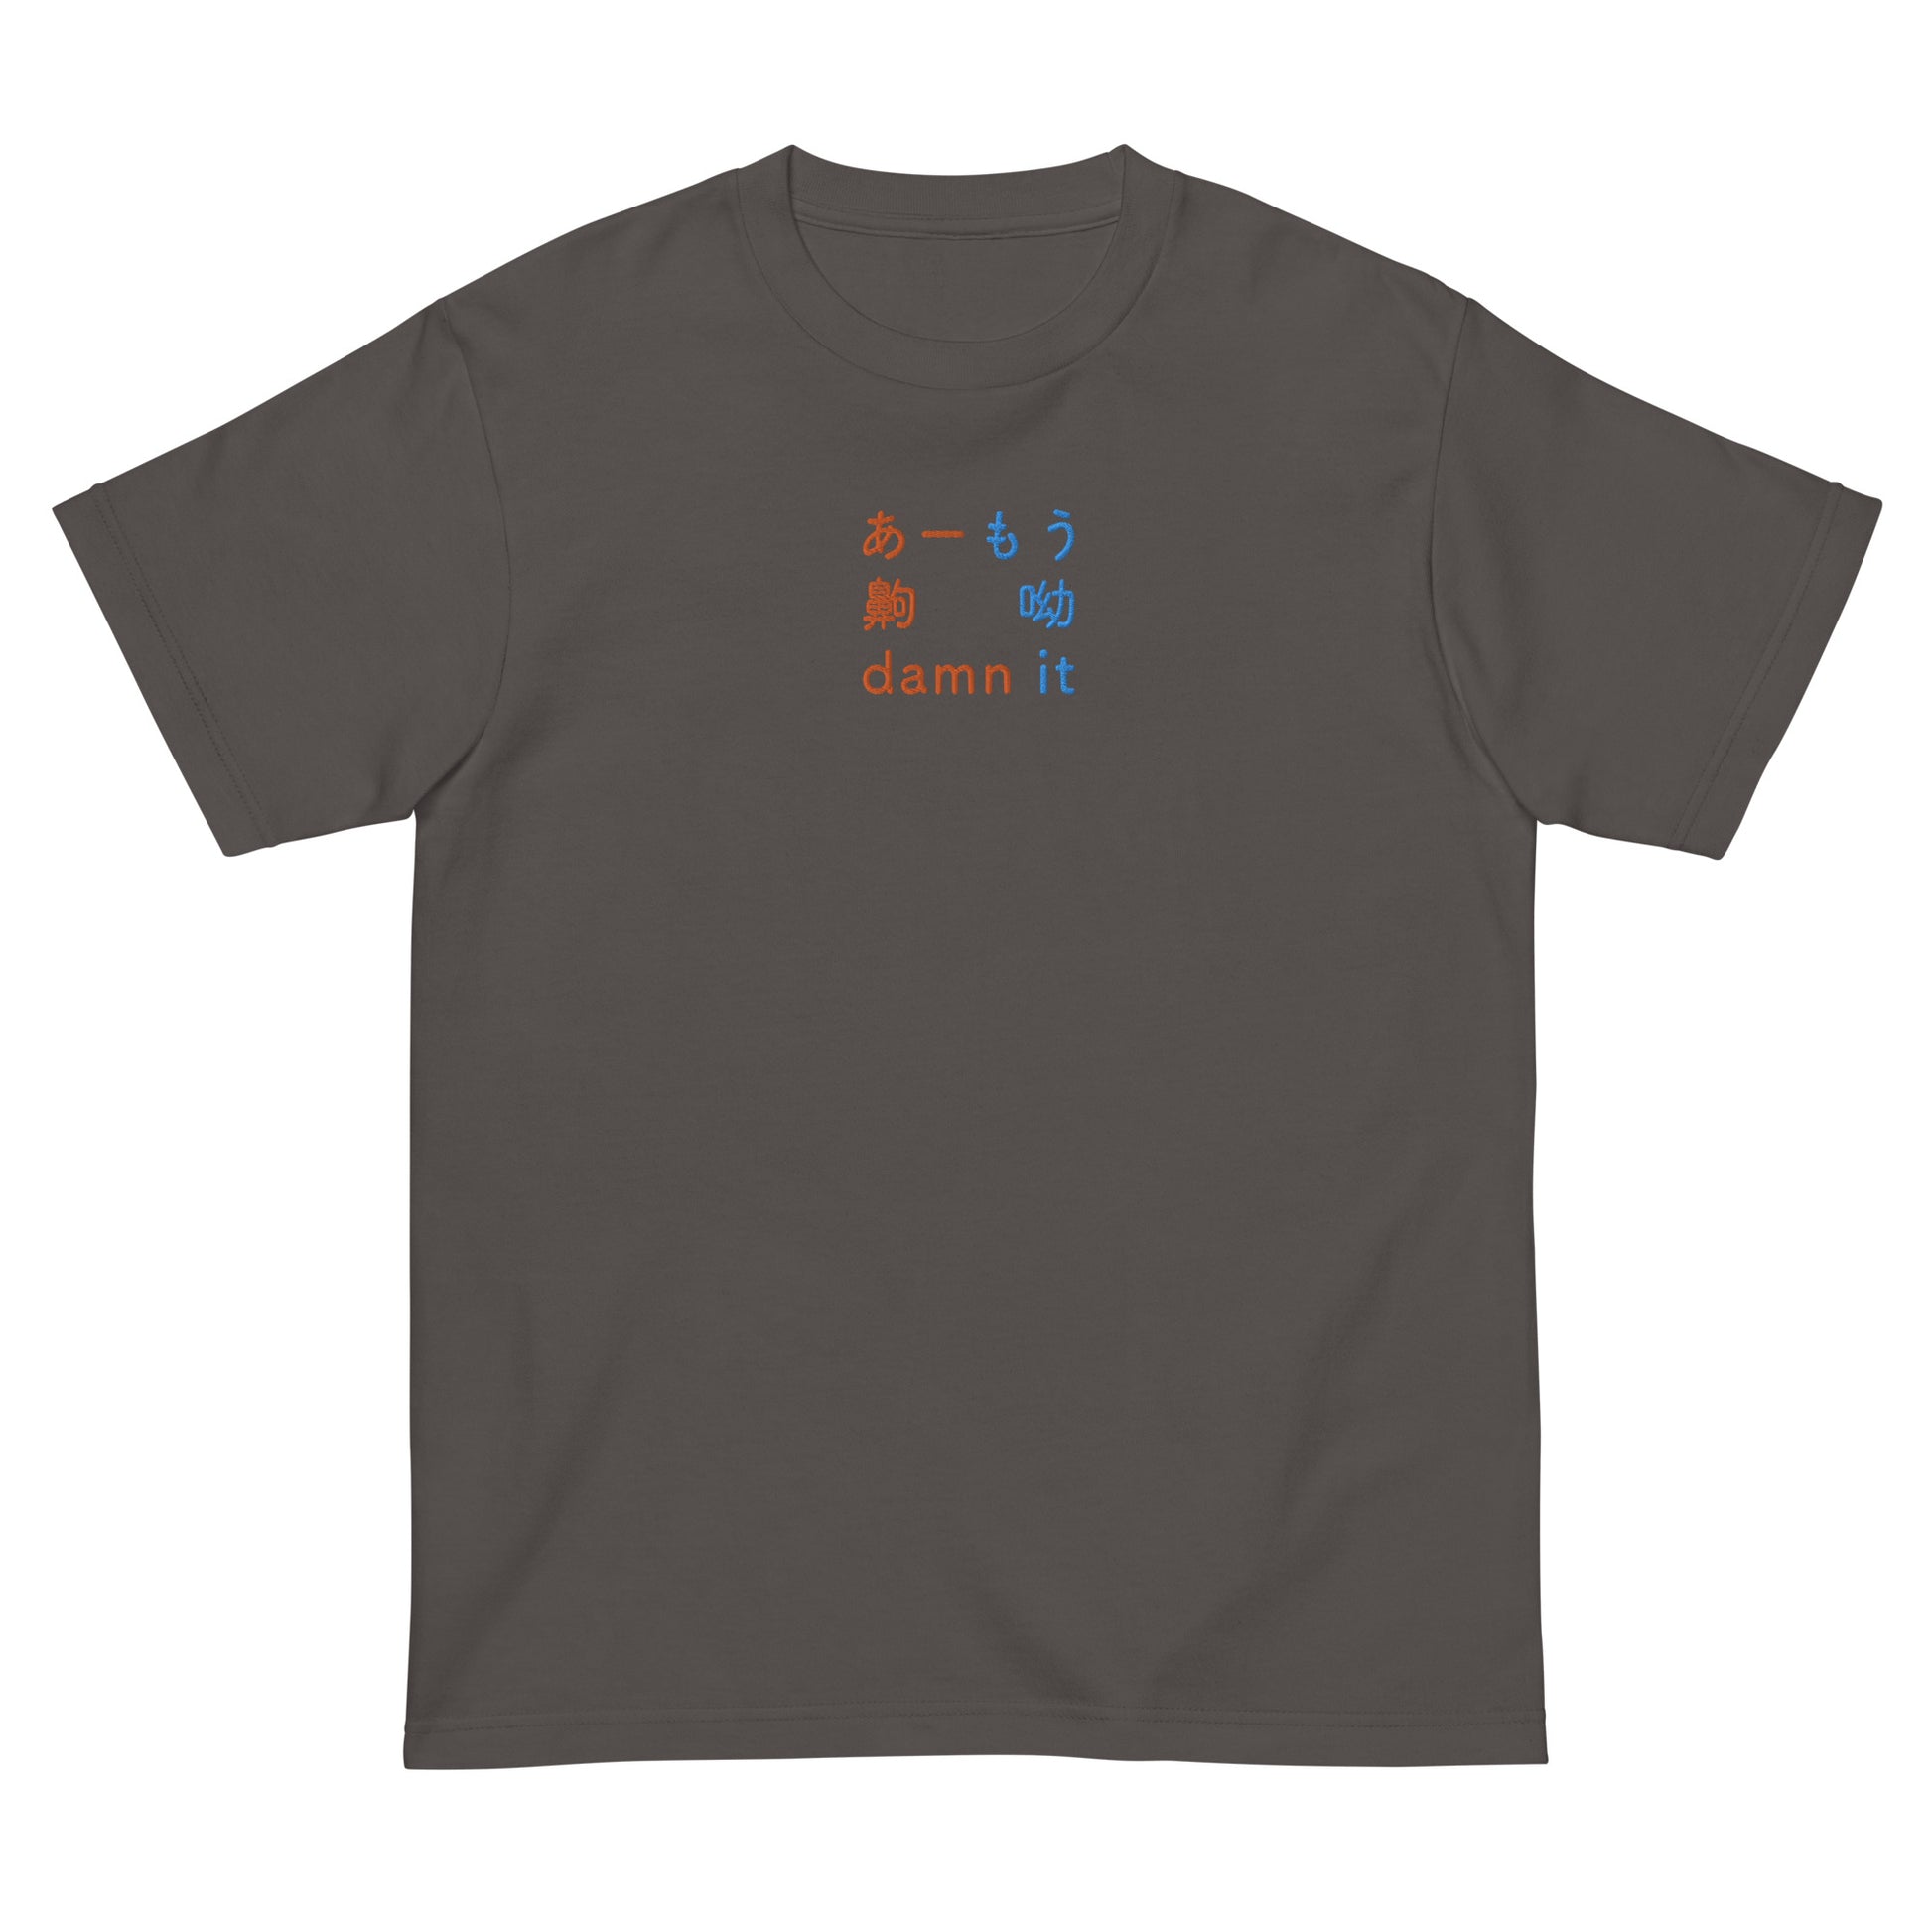 Dark Gray High Quality Tee - Front Design with an Orange,Blue Embroidery "Damn it" in Japanese,Chinese and English